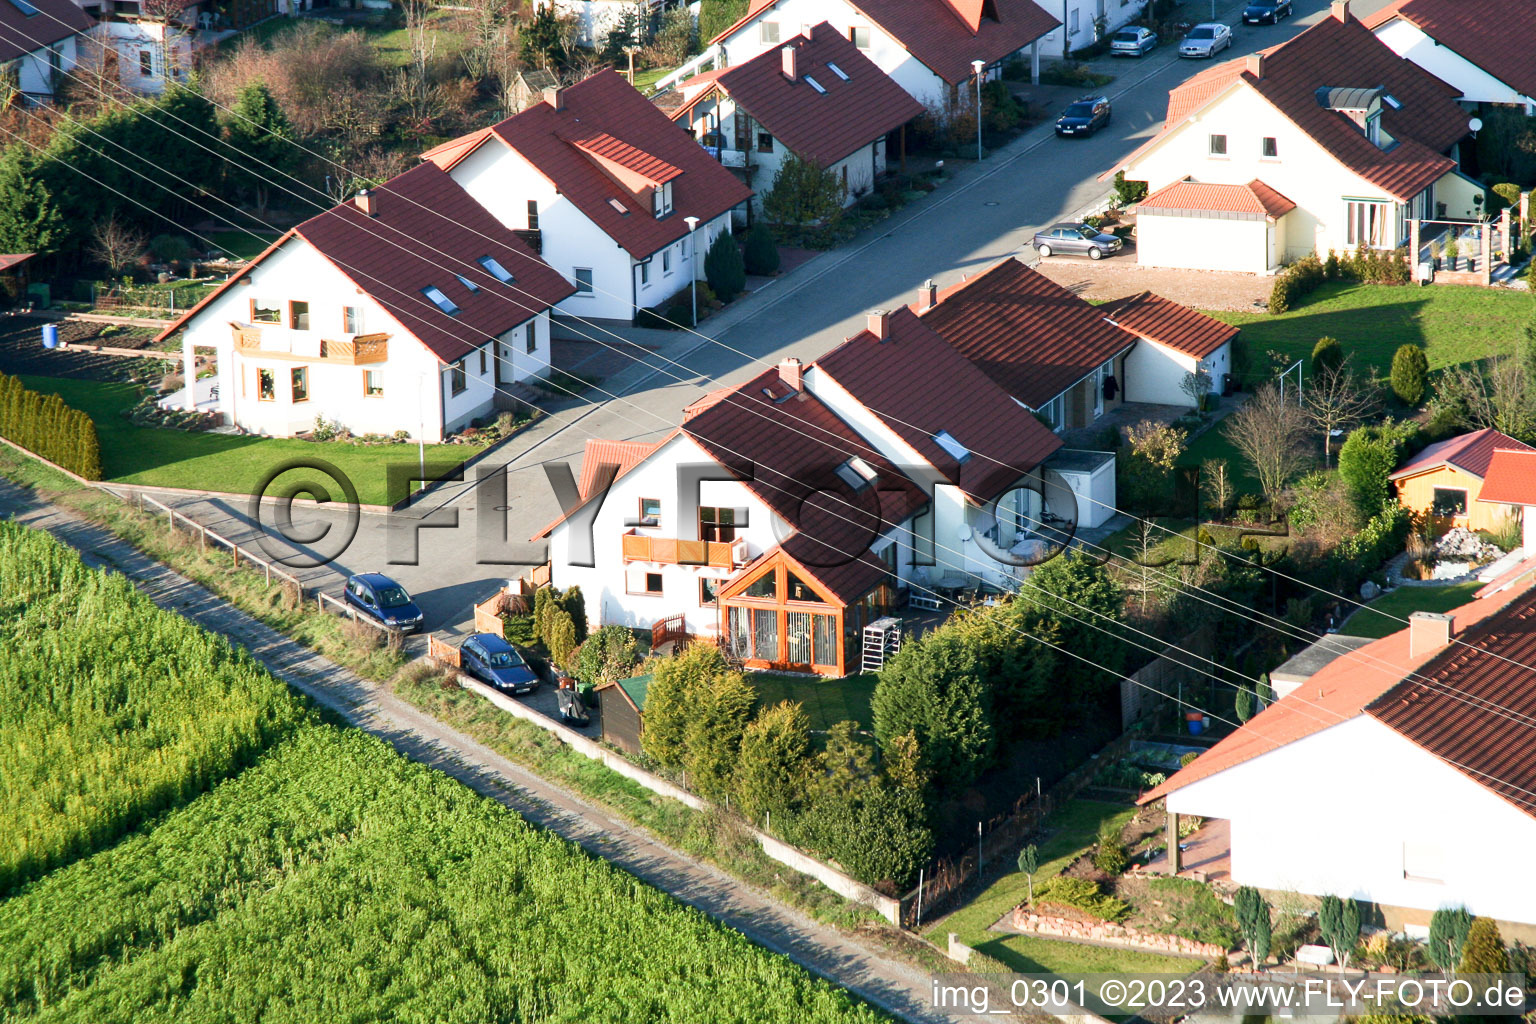 New development area at the Tongruben in Rheinzabern in the state Rhineland-Palatinate, Germany from above